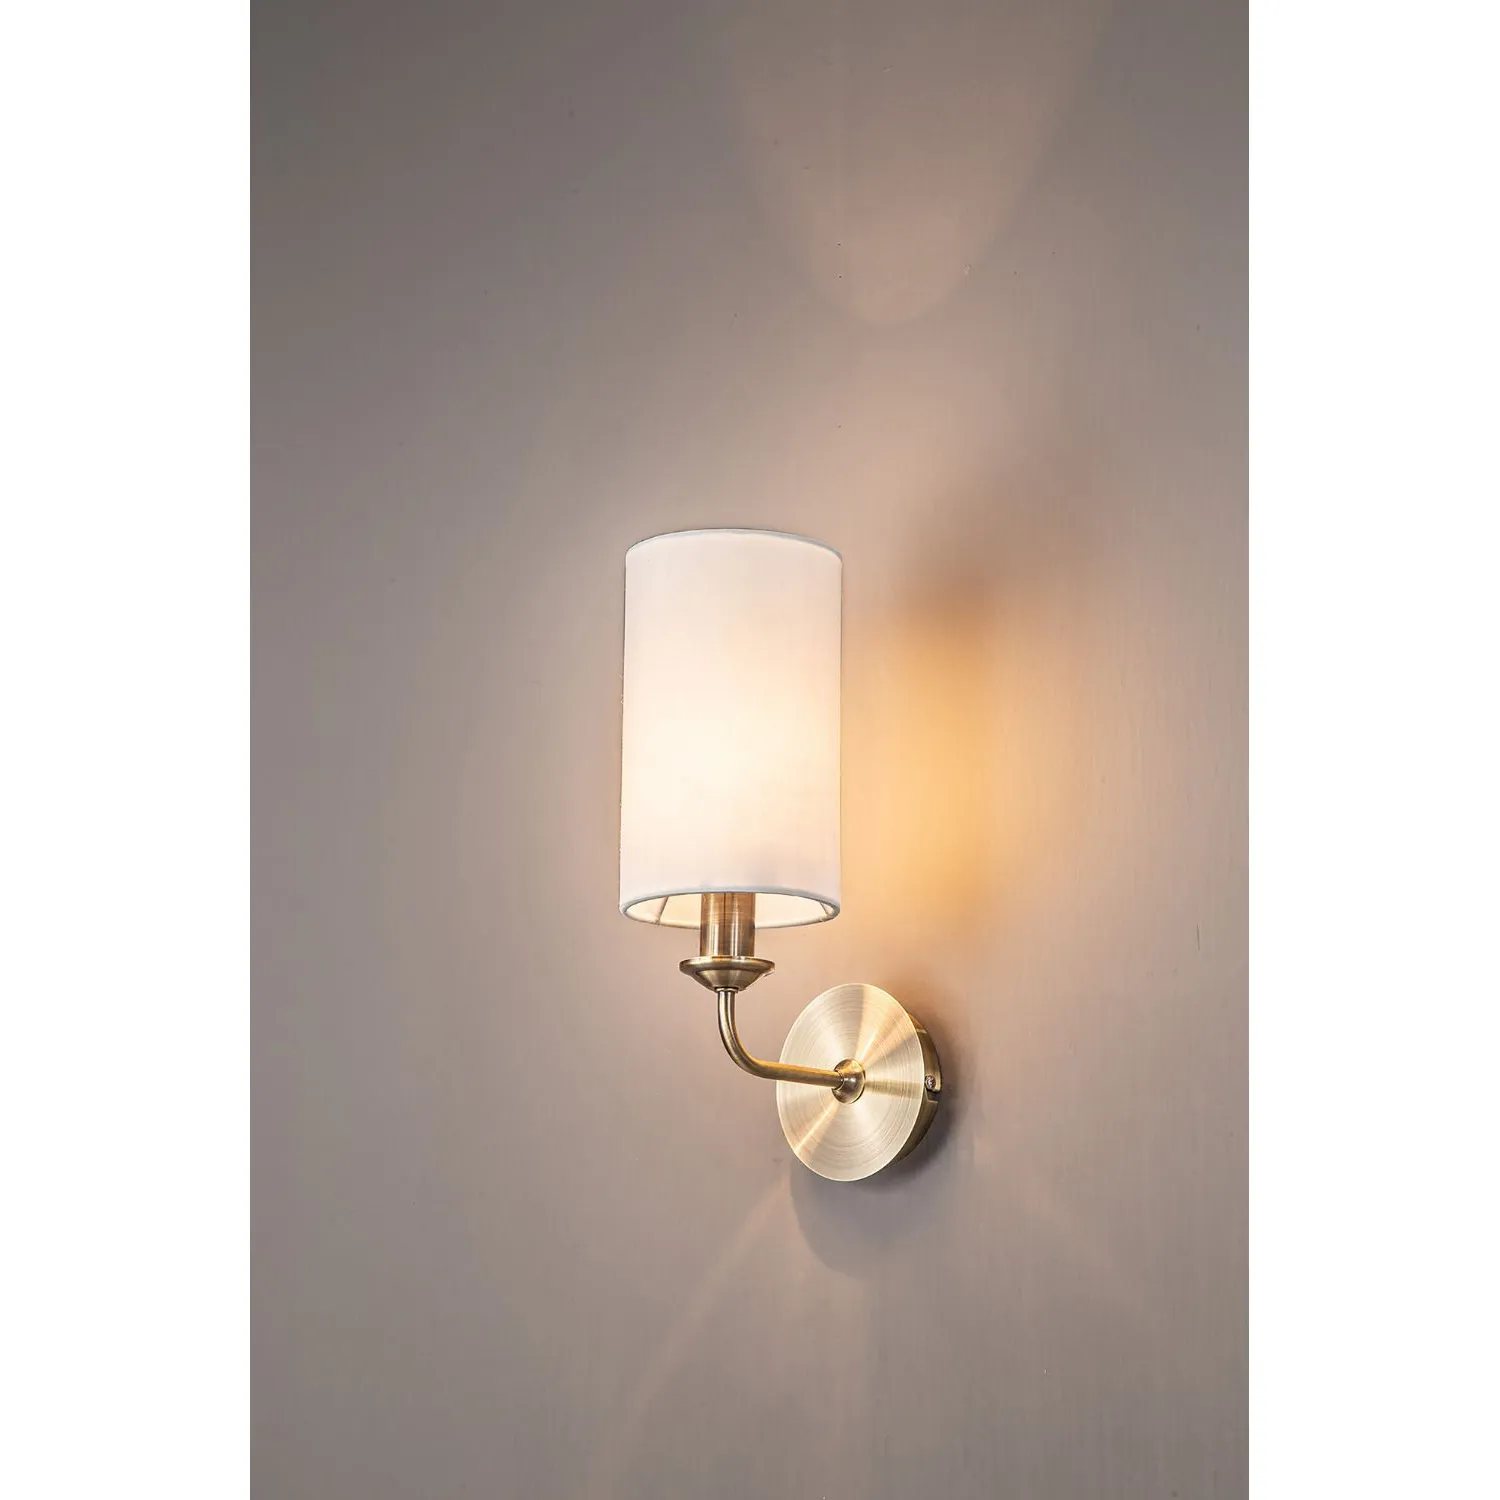 Banyan 1 Light Switched Wall Lamp, E14 Antique Brass c w 120mm Faux Silk Shade, White